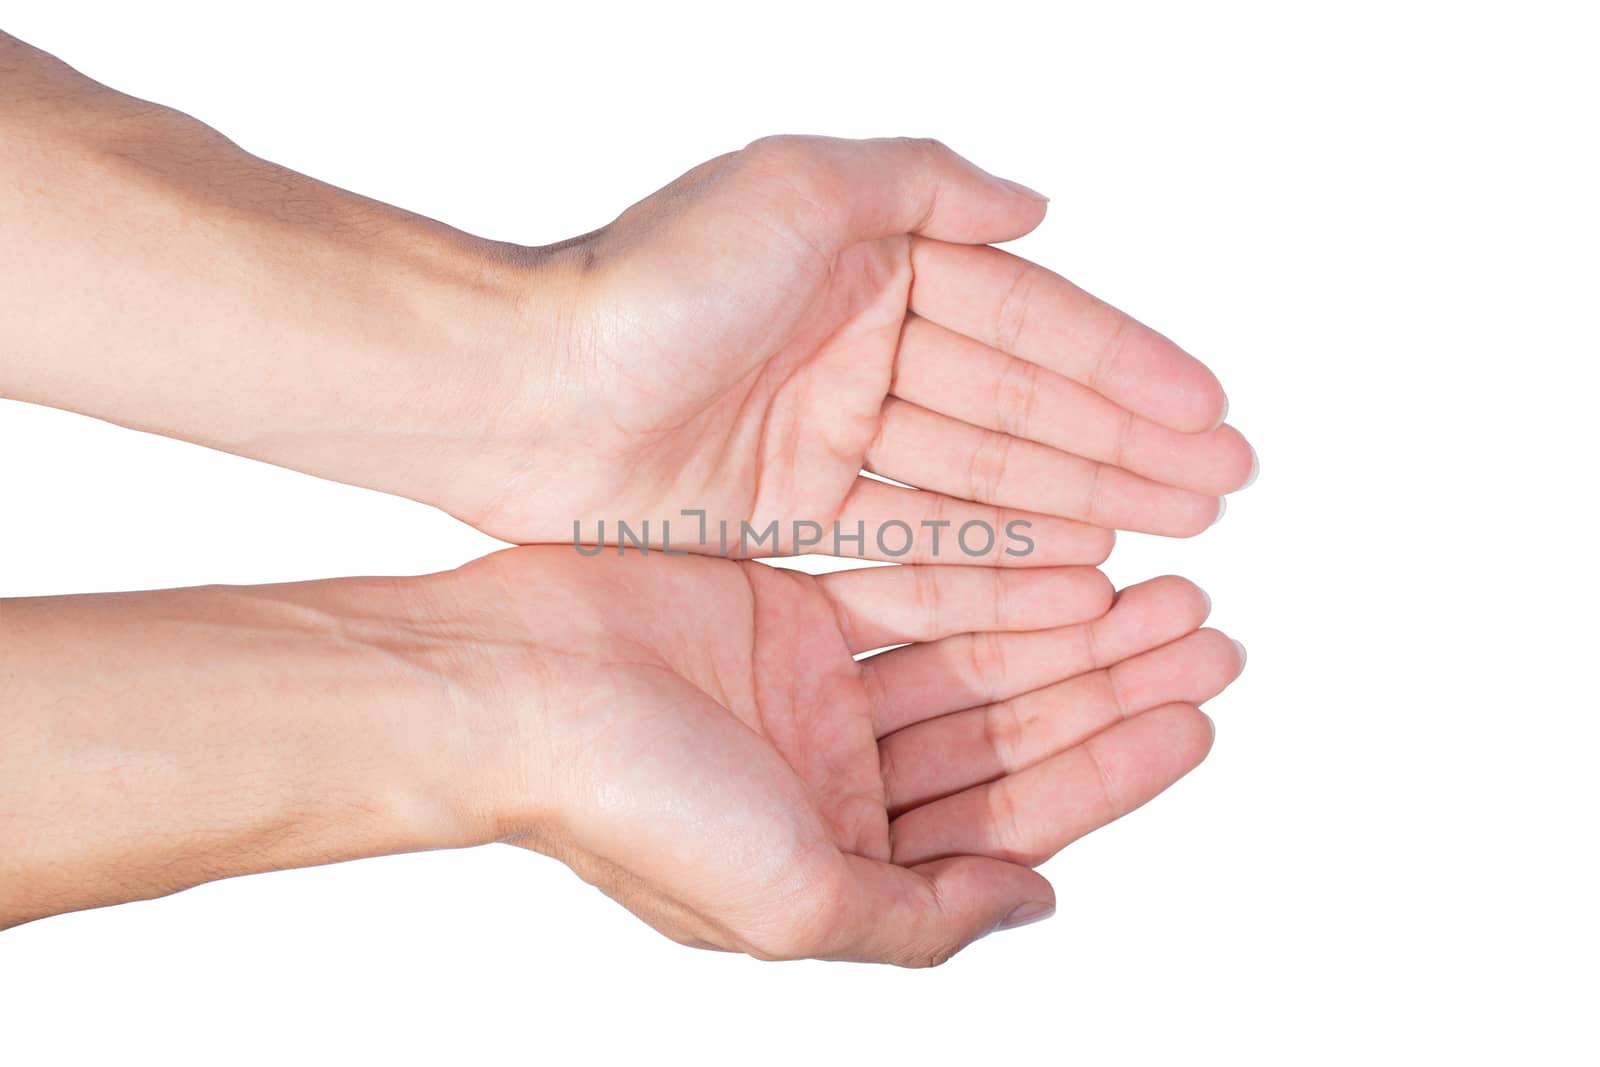 Hand gestures in a white background